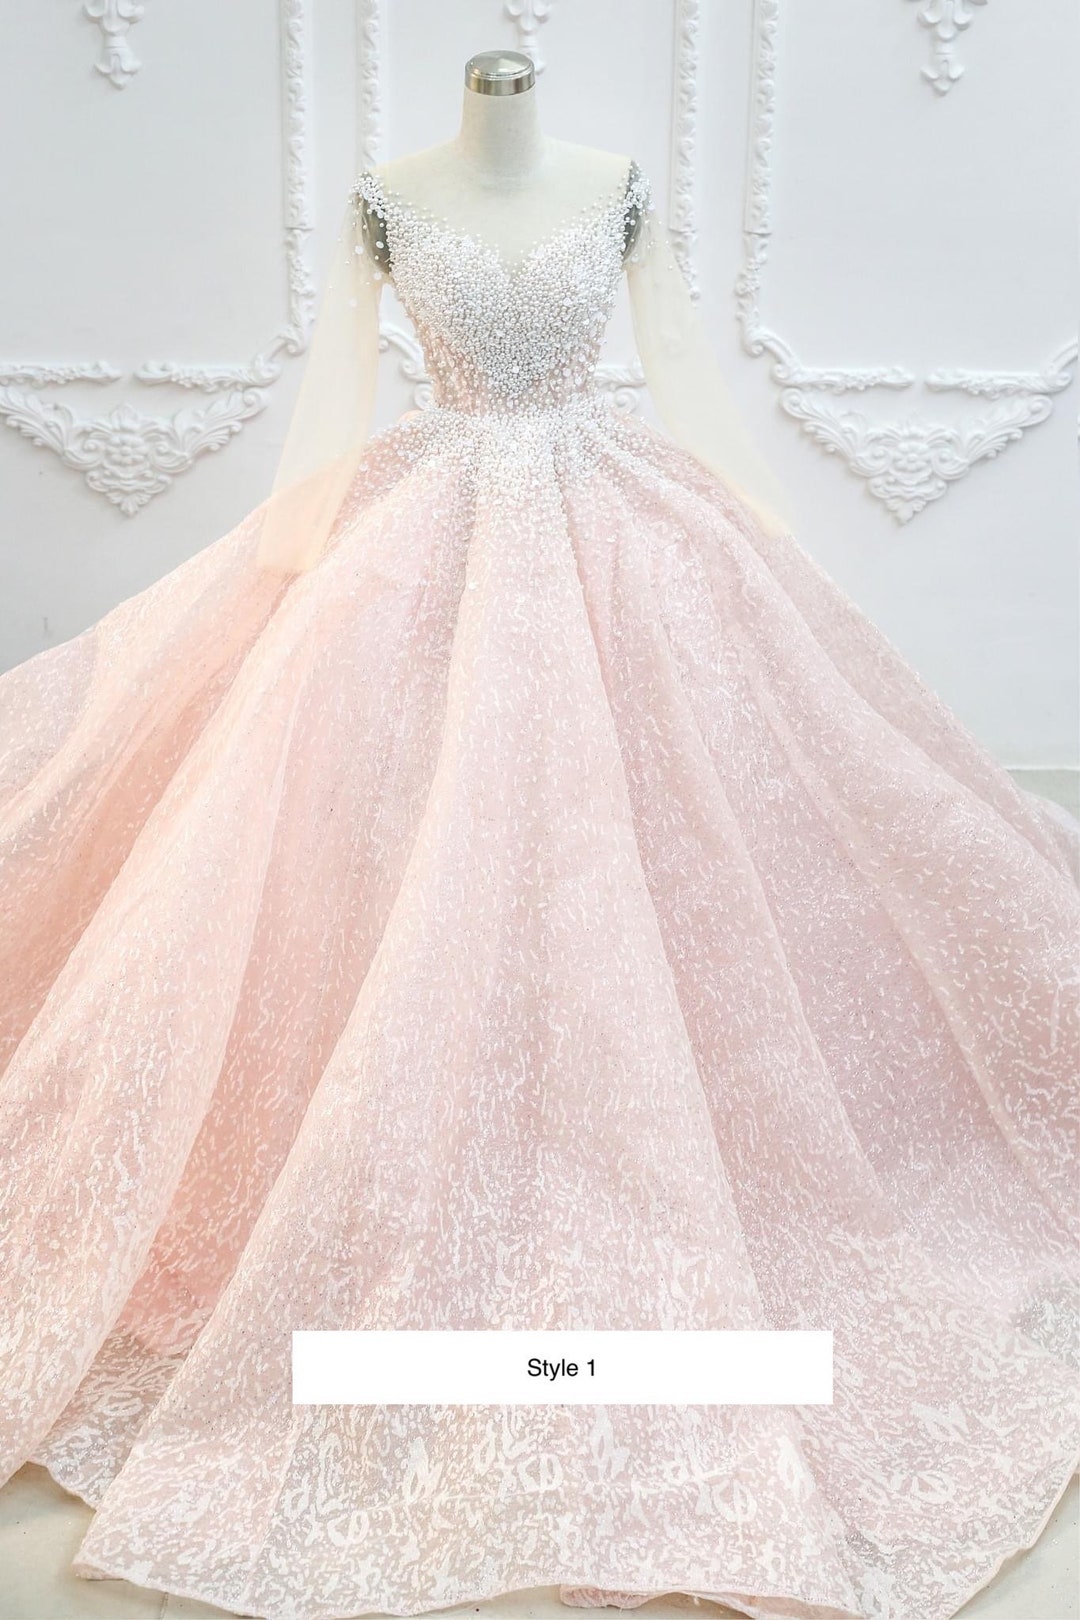 Hot Selling 2022 Pink Off Shoulder Butterfly Themed Quinceanera Ball Gown  With Handmade Flower Detailing And Corset For Sweet 16 Prom And Weddings  From Verycute, $55.15 | DHgate.Com